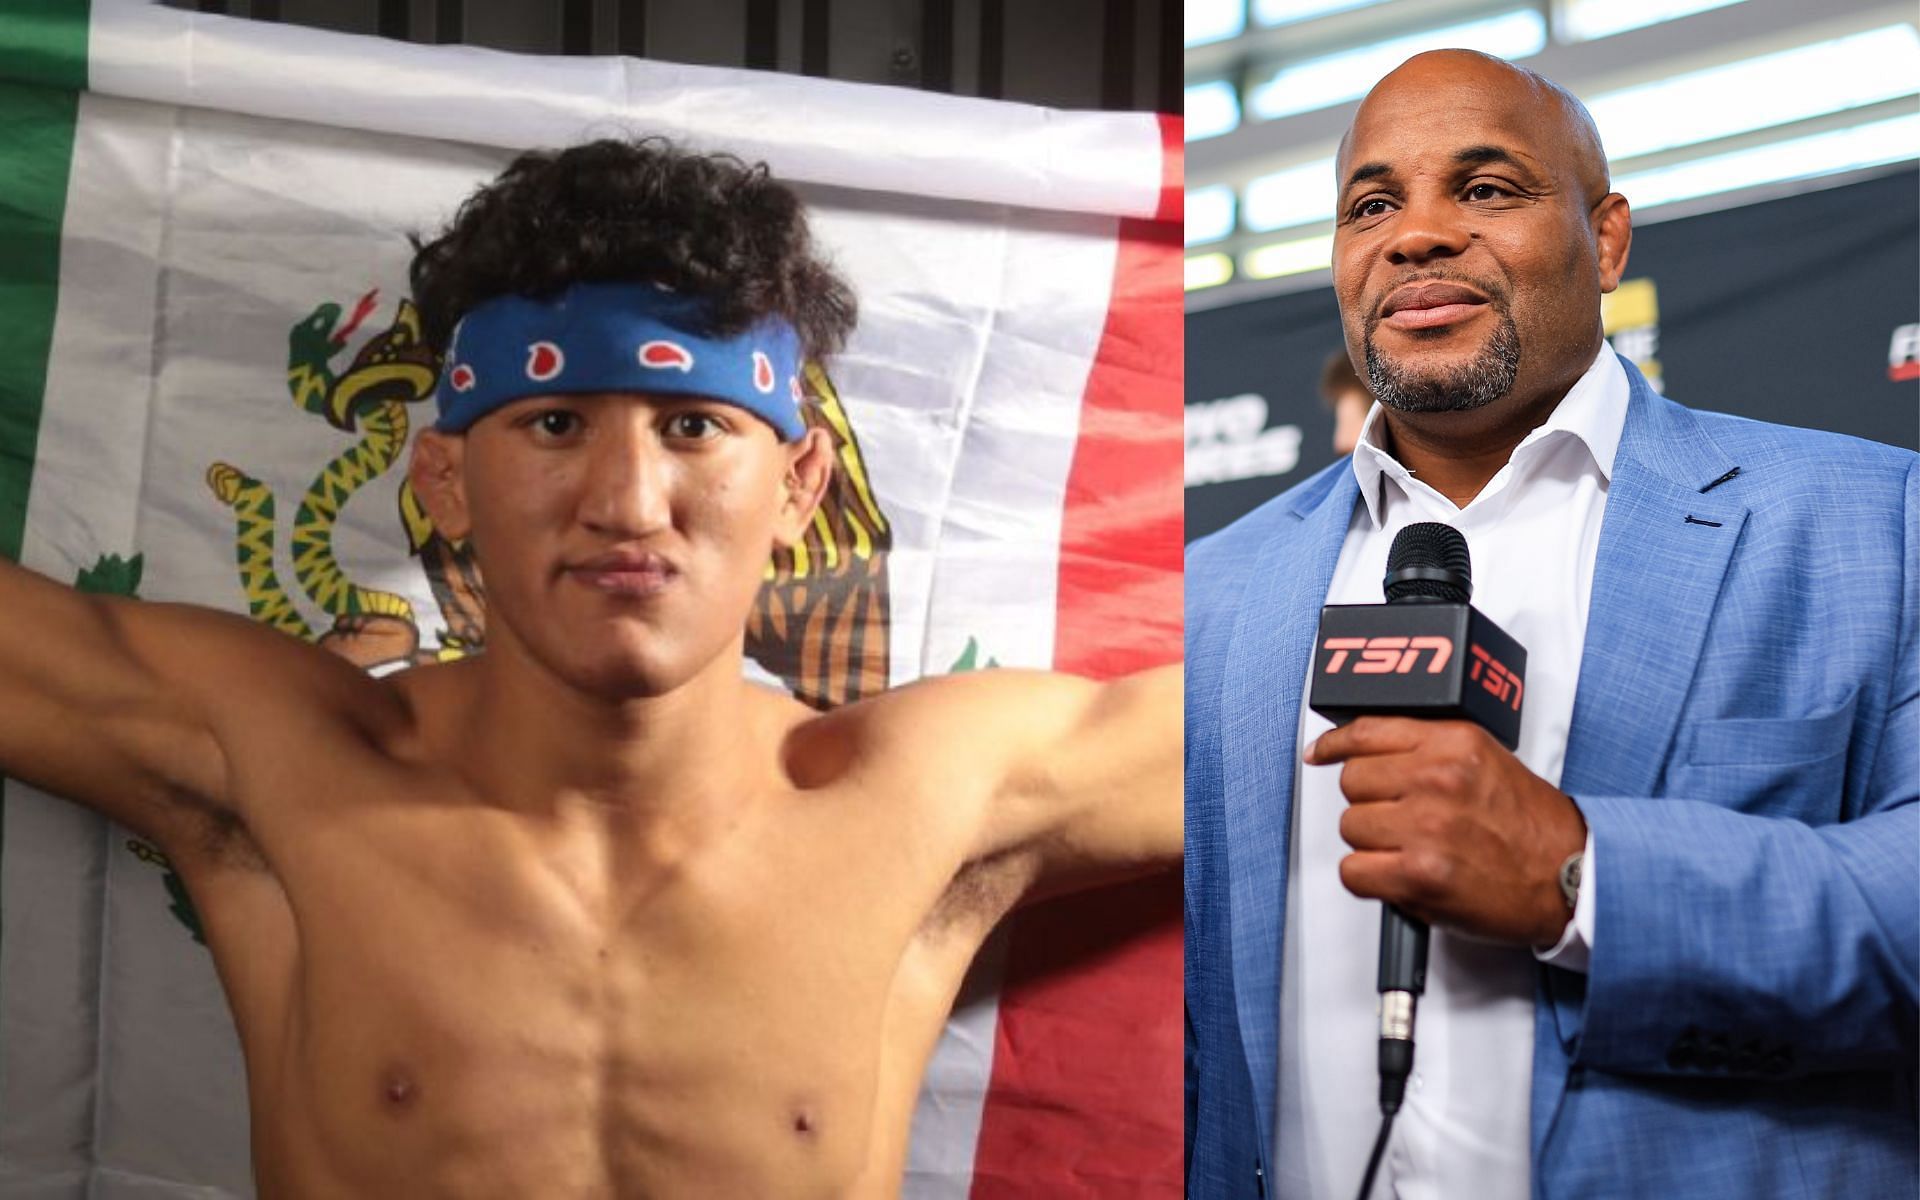 Raul Rosas Jr. (left) and Daniel Cormier (right). [Images courtesy: left image from ESPN and right image from Getty Images]